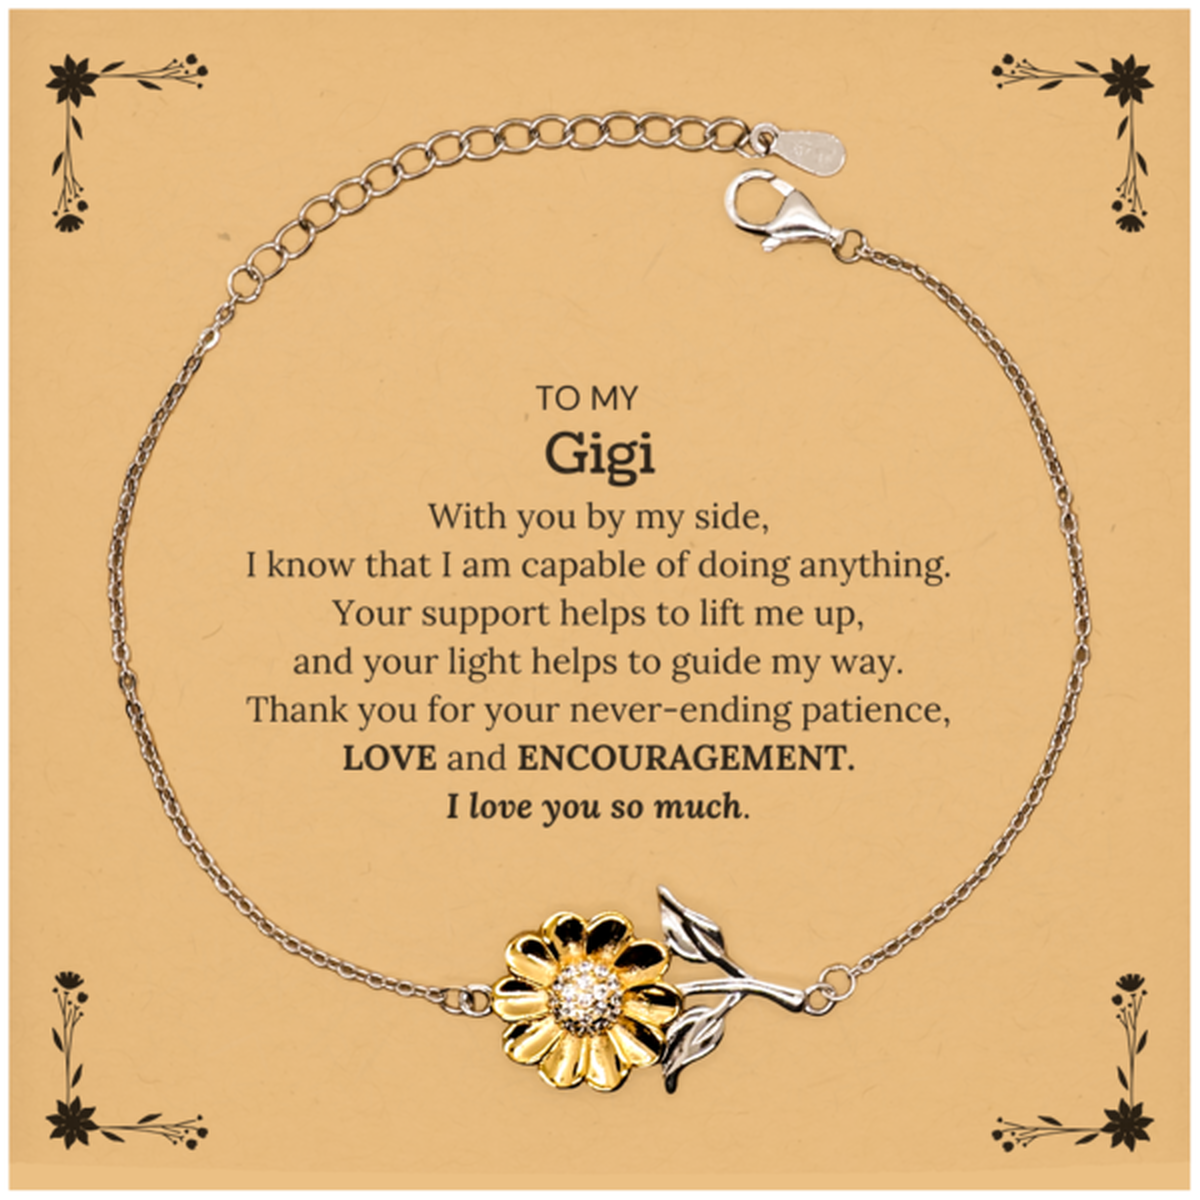 Appreciation Gigi Sunflower Bracelet Gifts, To My Gigi Birthday Christmas Wedding Keepsake Gifts for Gigi With you by my side, I know that I am capable of doing anything. I love you so much